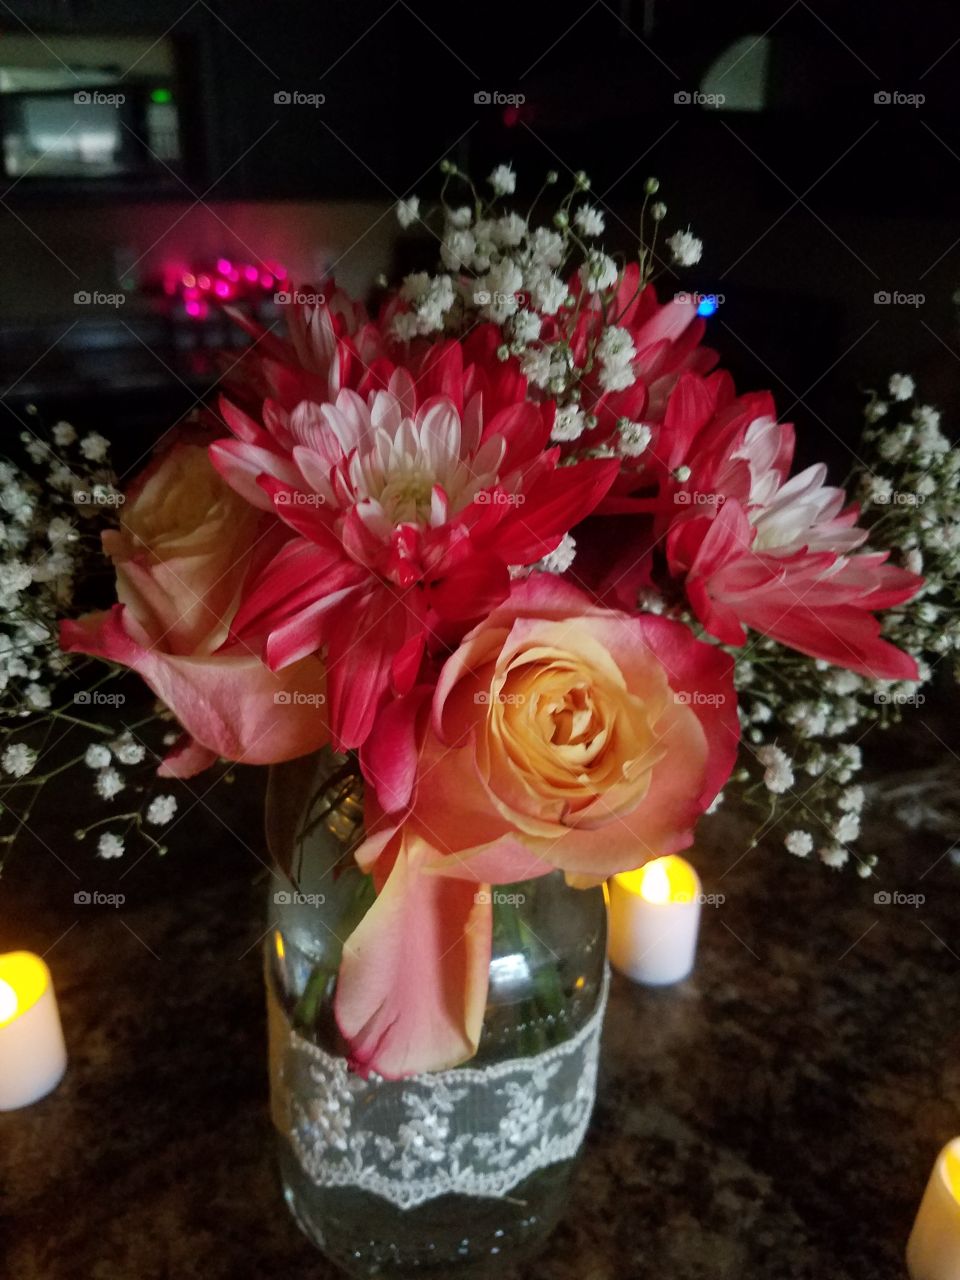 Bouquet from when my fiancee proposed!